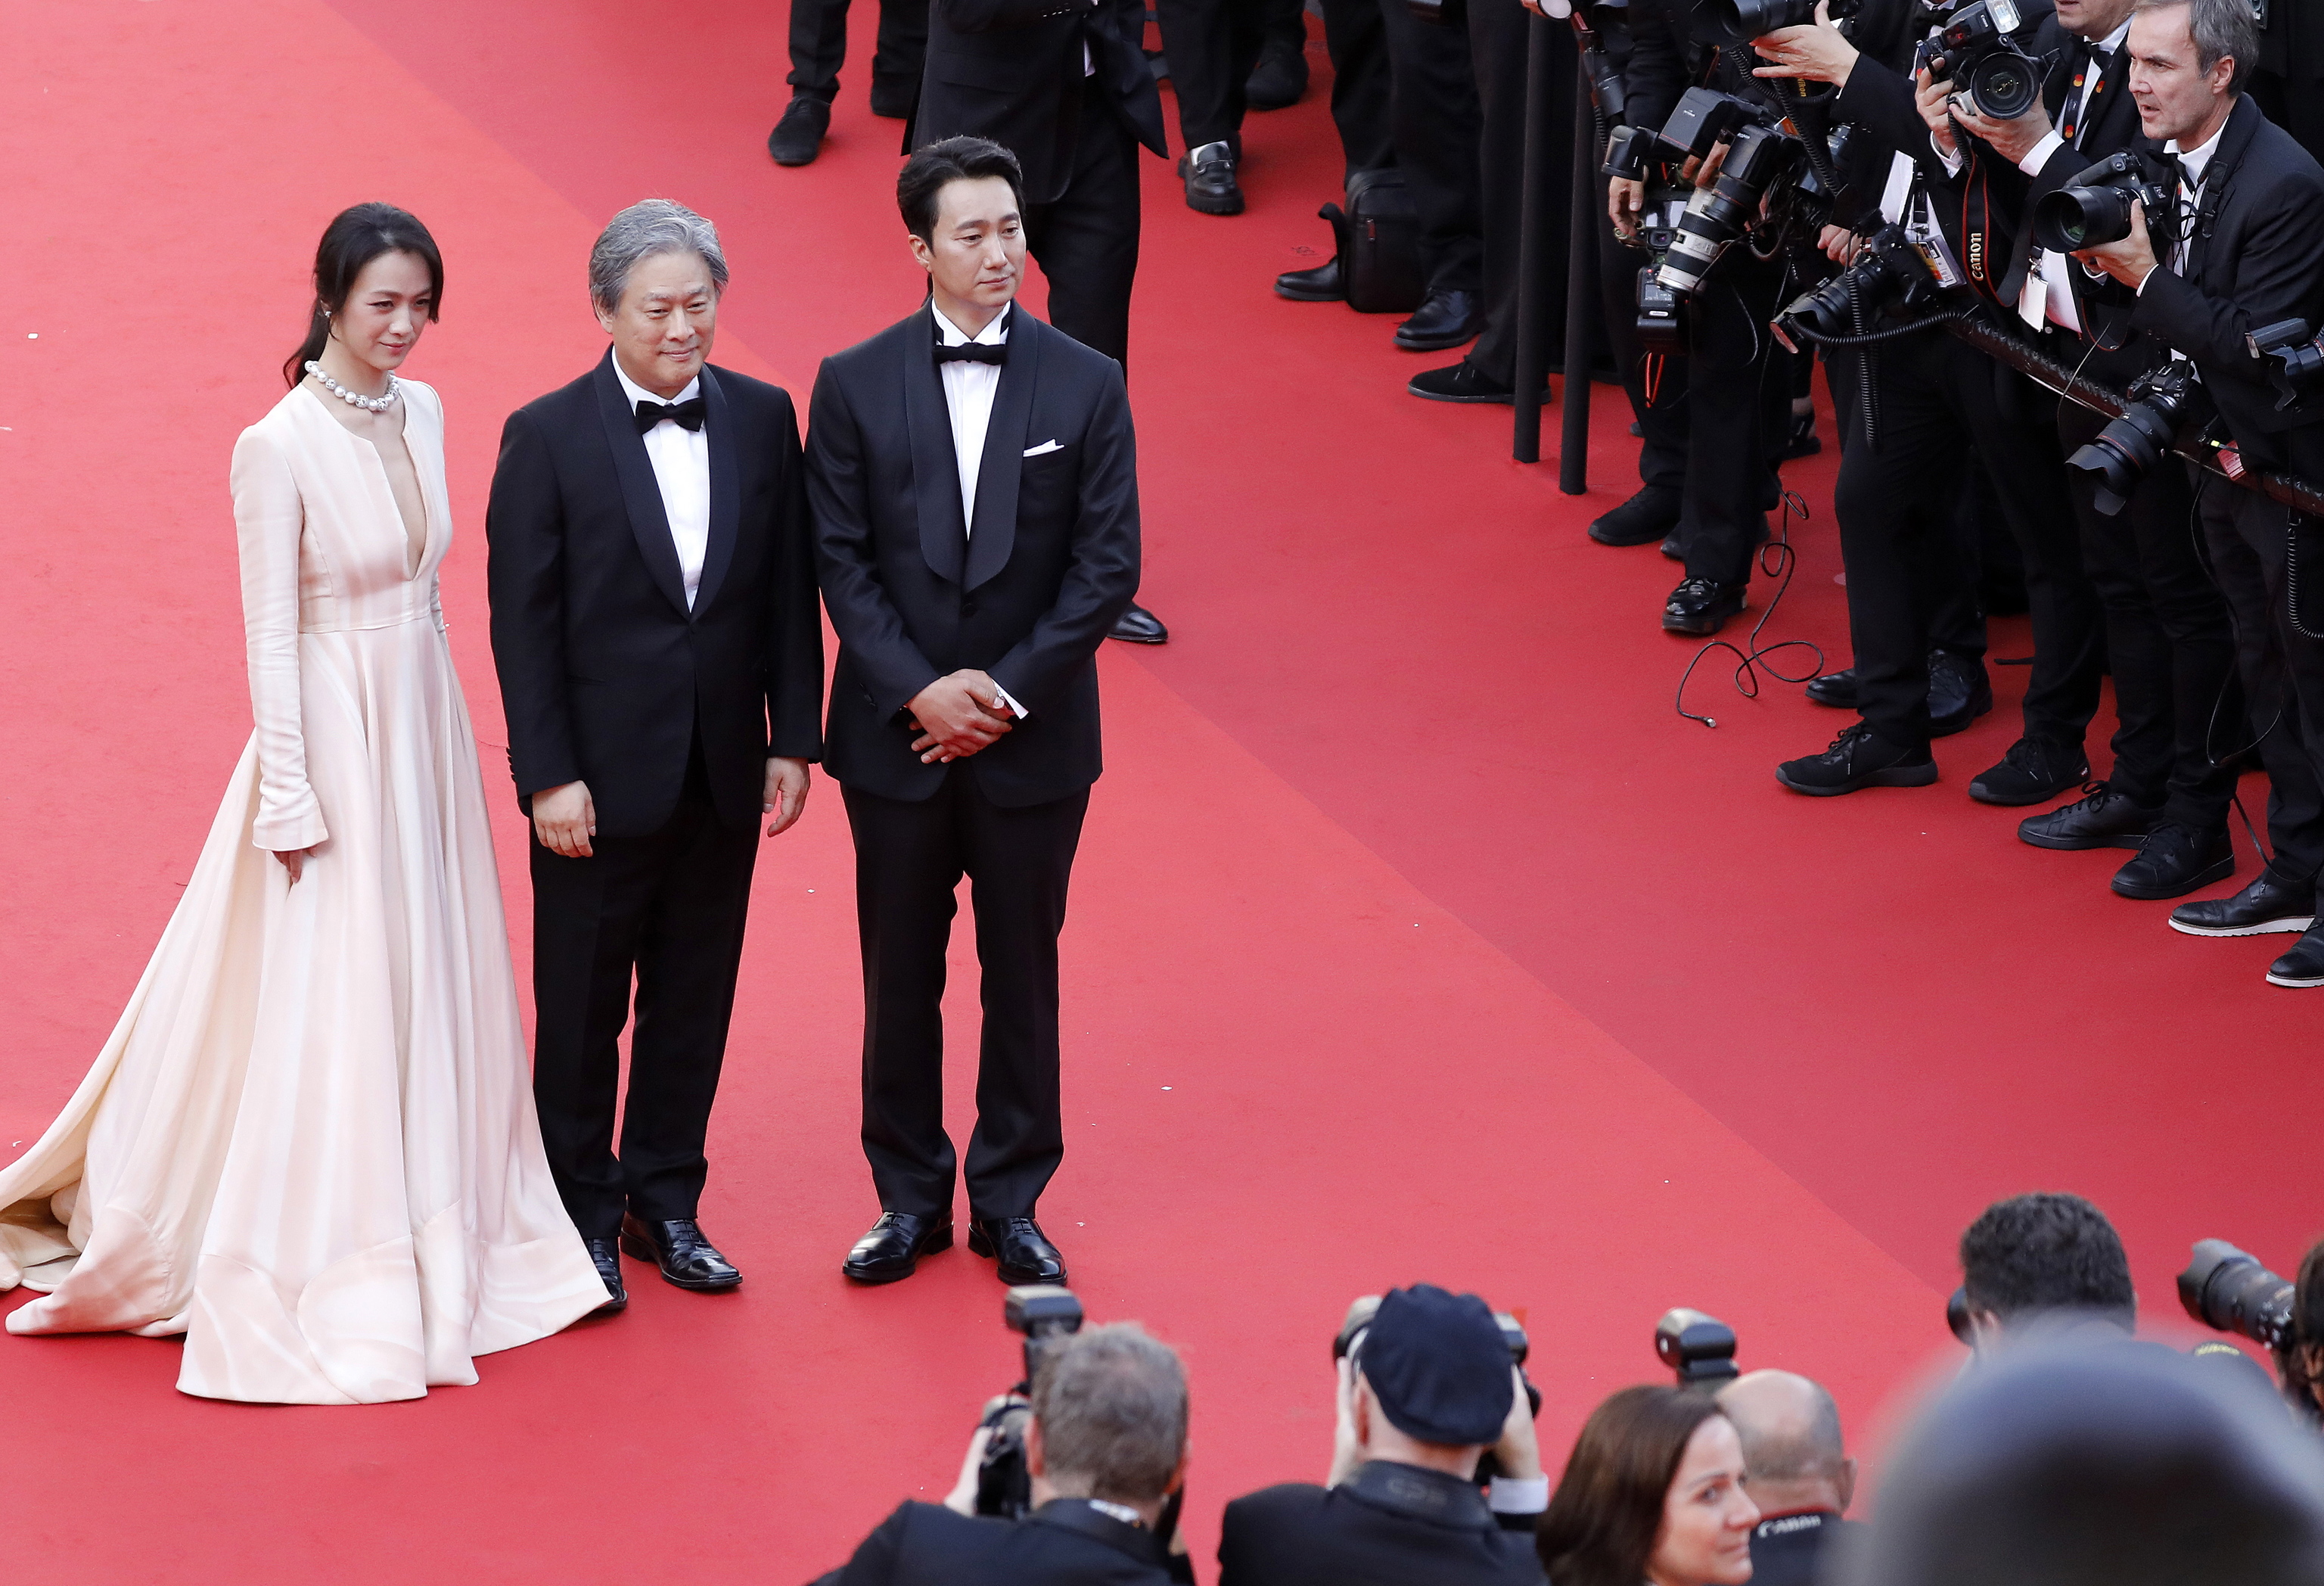 Presented by Chinese actress Tang Wei, South Korean director Park Chan-wook and South Korean actor Park Hee-il